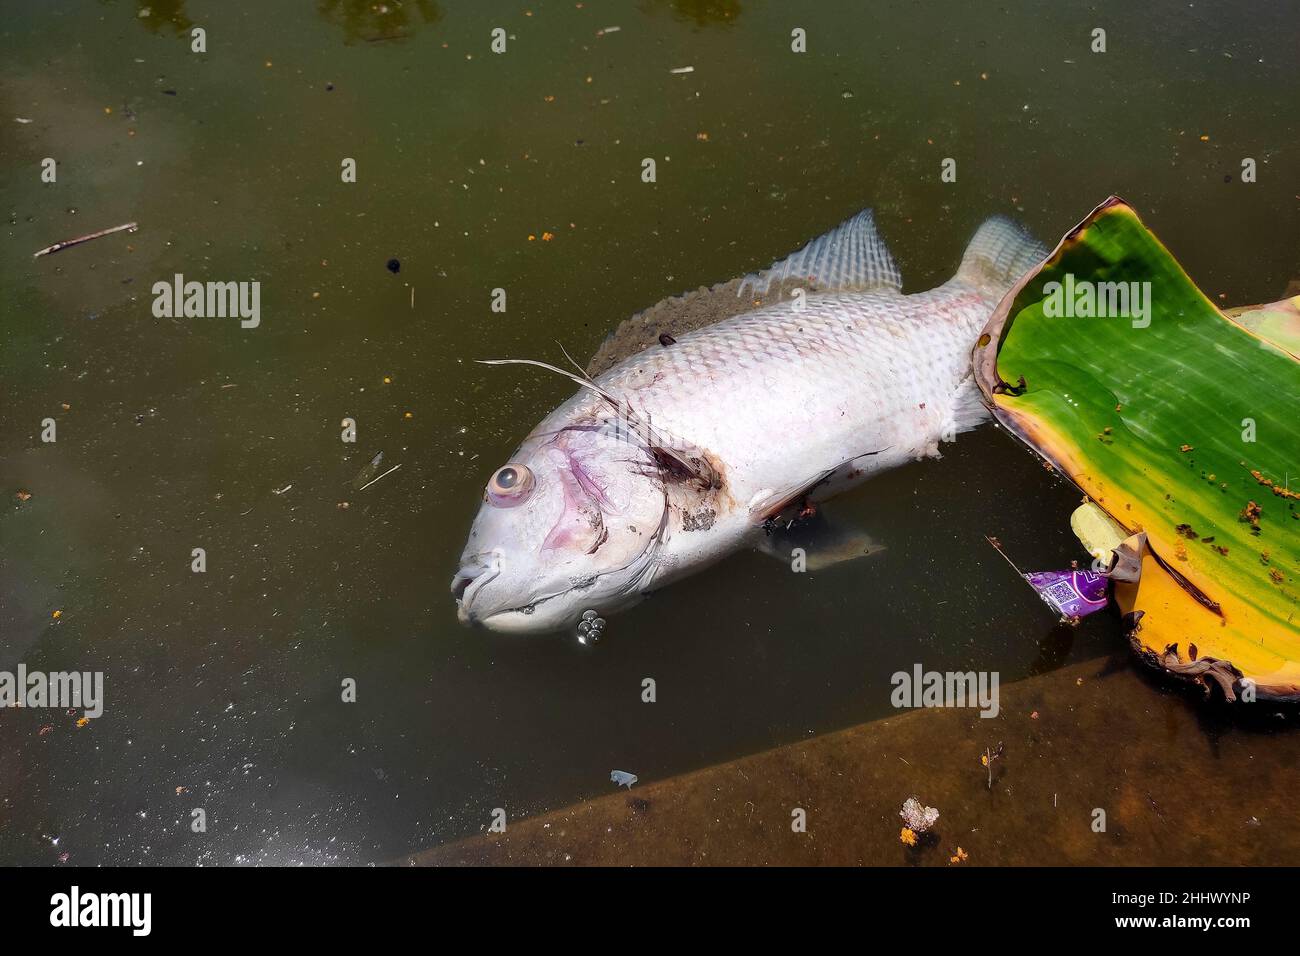 dead fish floating in the pond Stock Photo